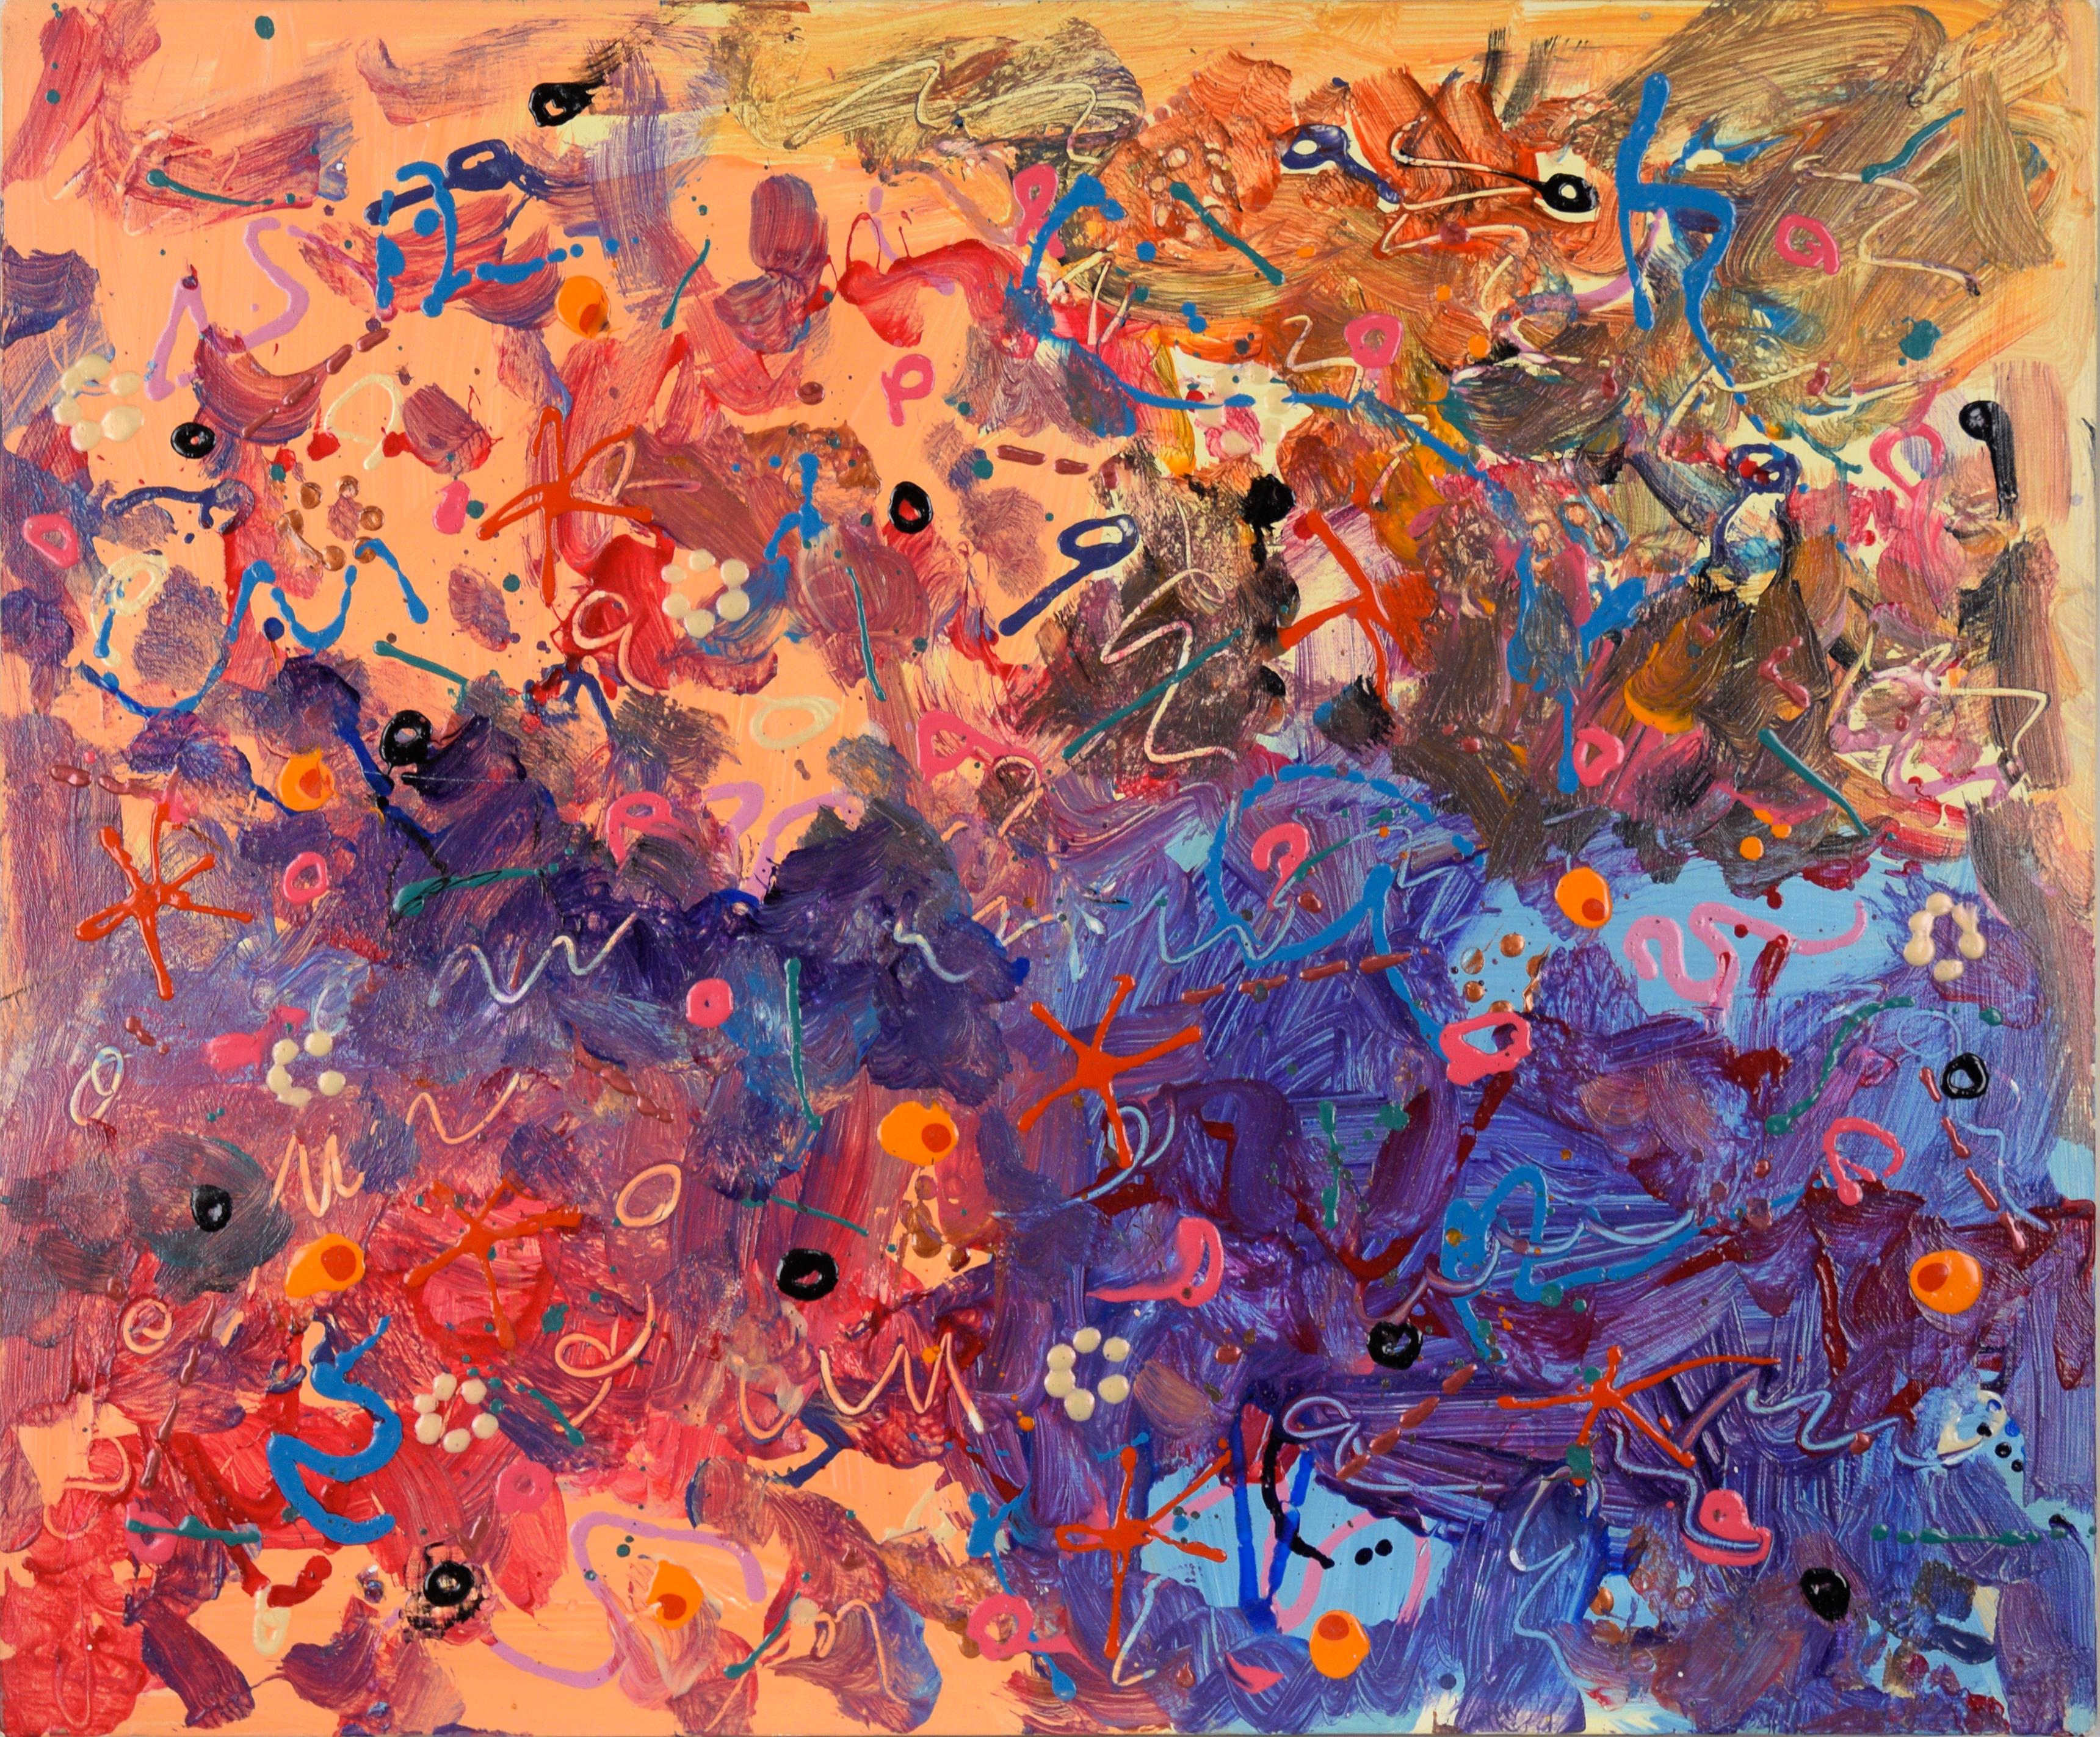 Debby Beck Abstract Painting - "Cosmic Enzymes on the Loose" Abstract Expressionist Composition in Acrylic